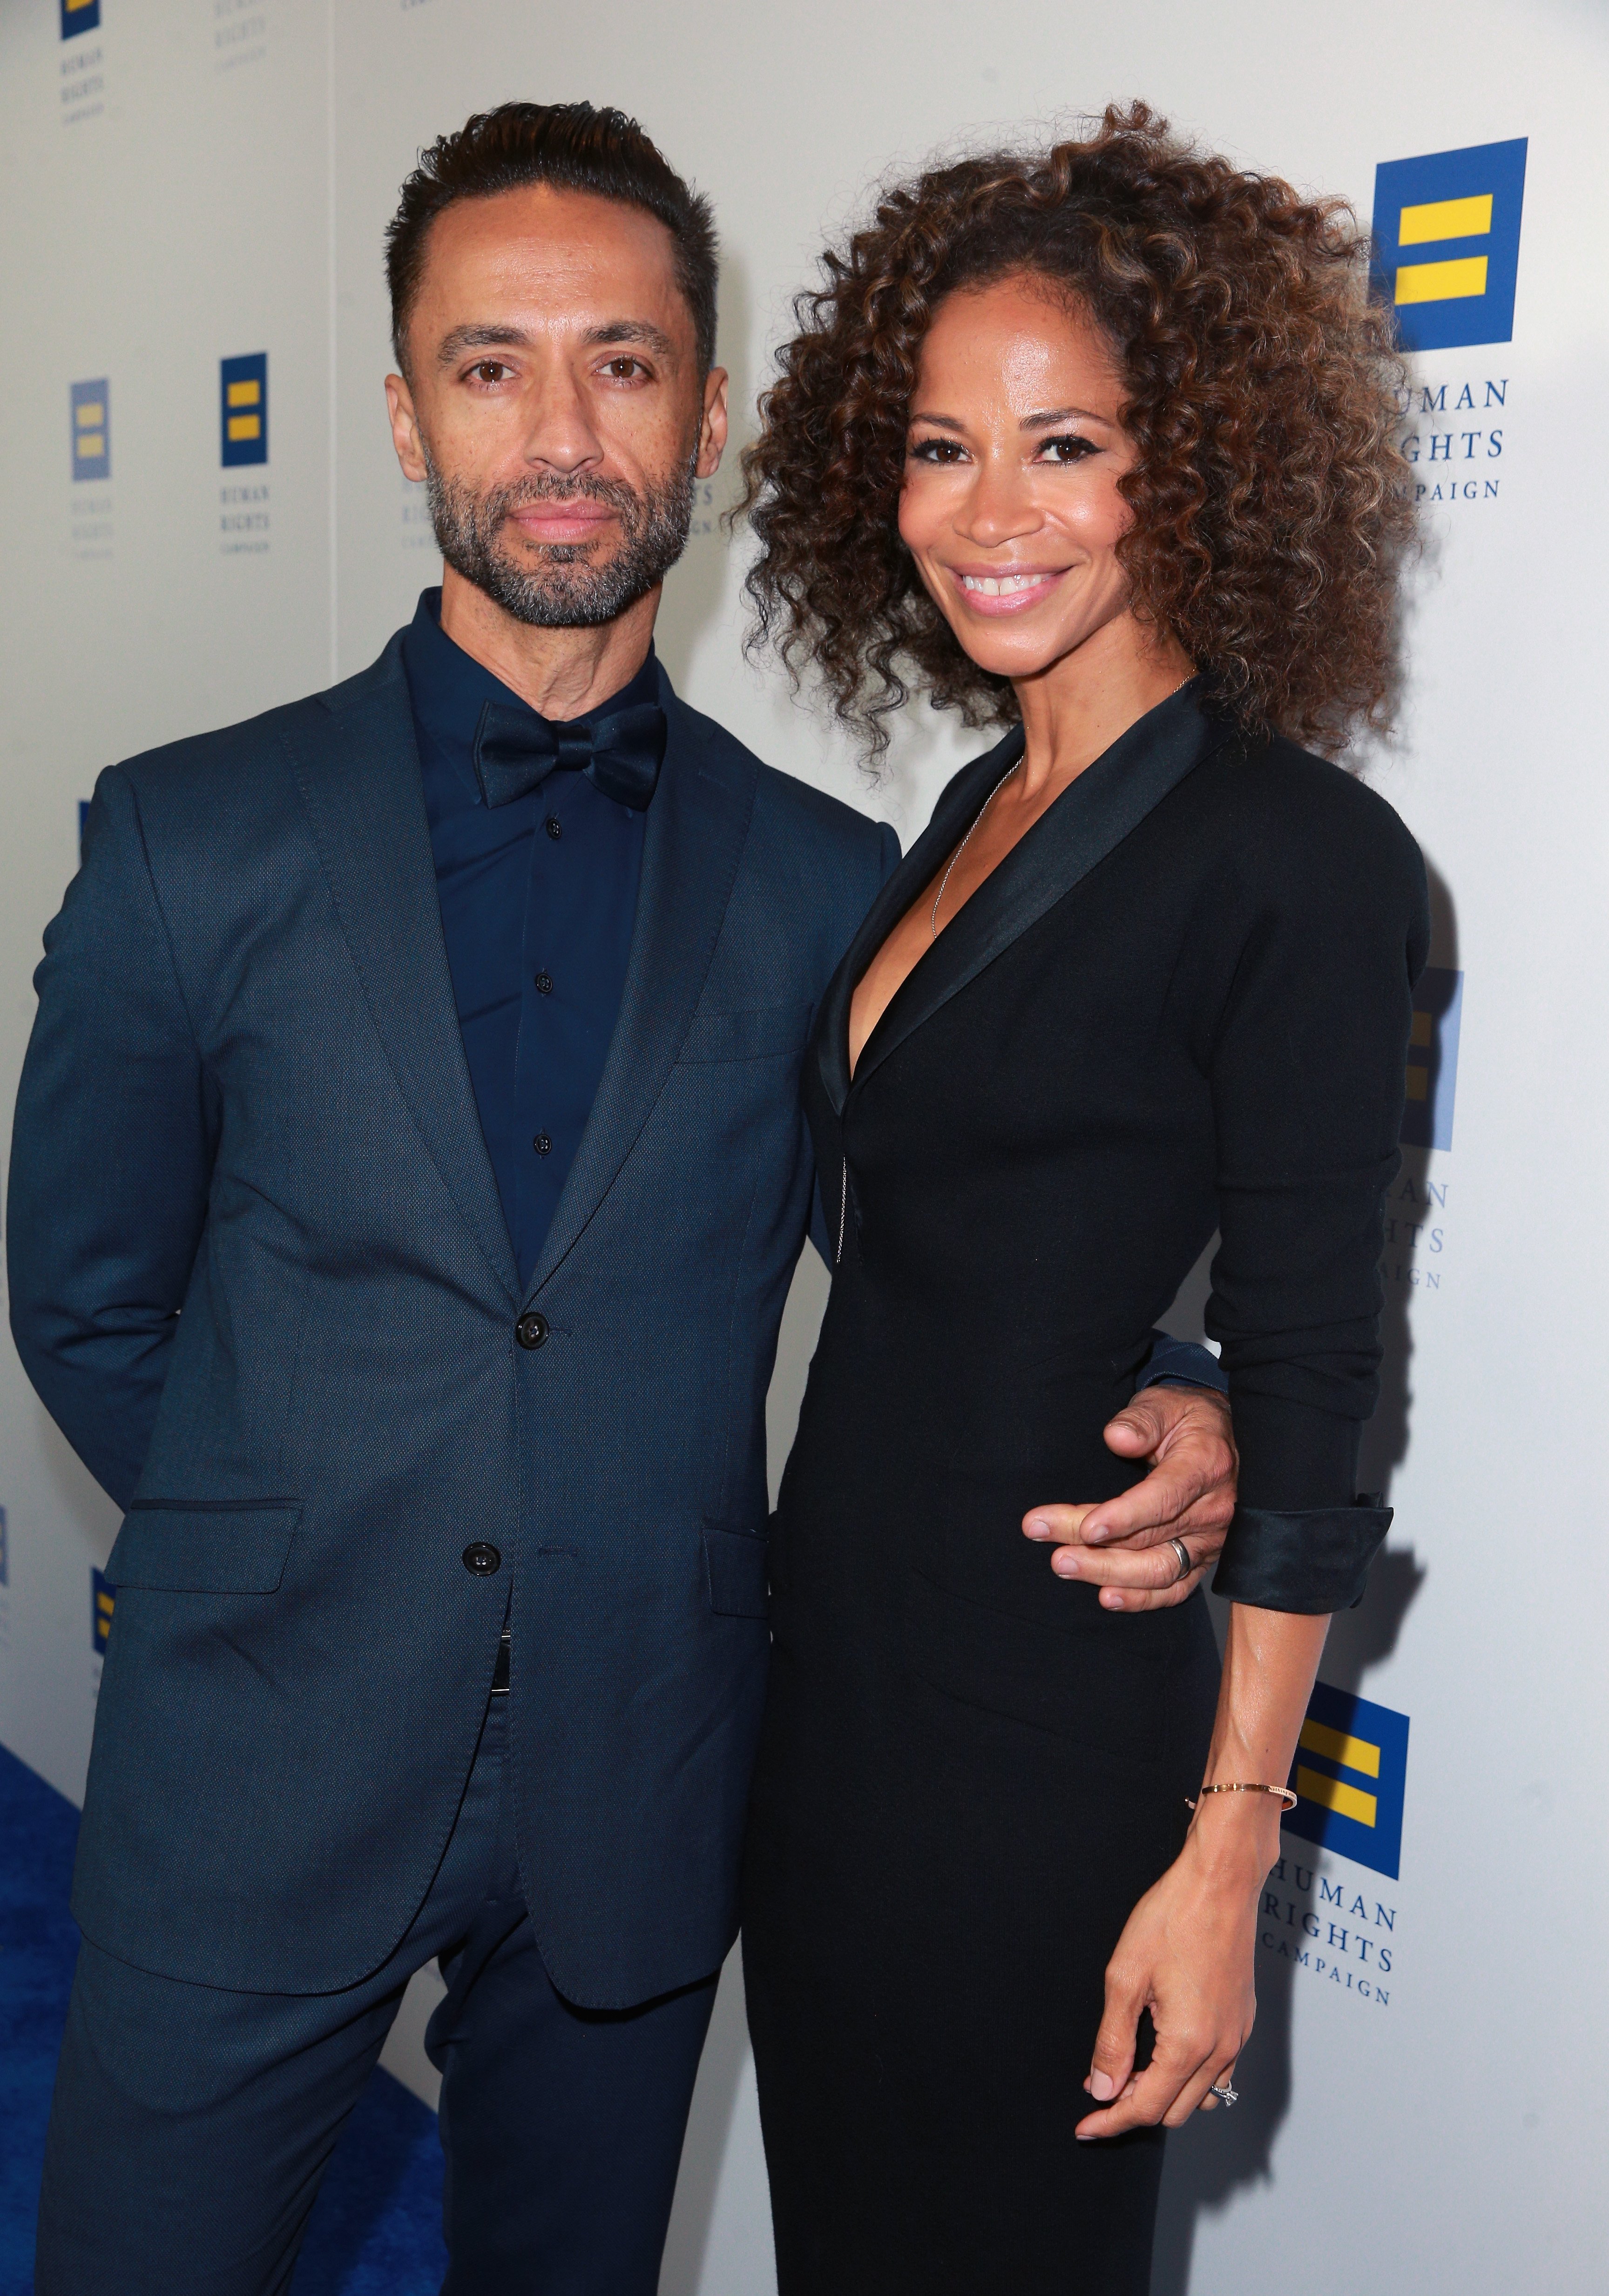 Kamar de los Reyes (L) and Sherri Saum attend The Human Rights Campaign 2018 Los Angeles Gala Dinner at JW Marriott Los Angeles. | Source: Getty Images.